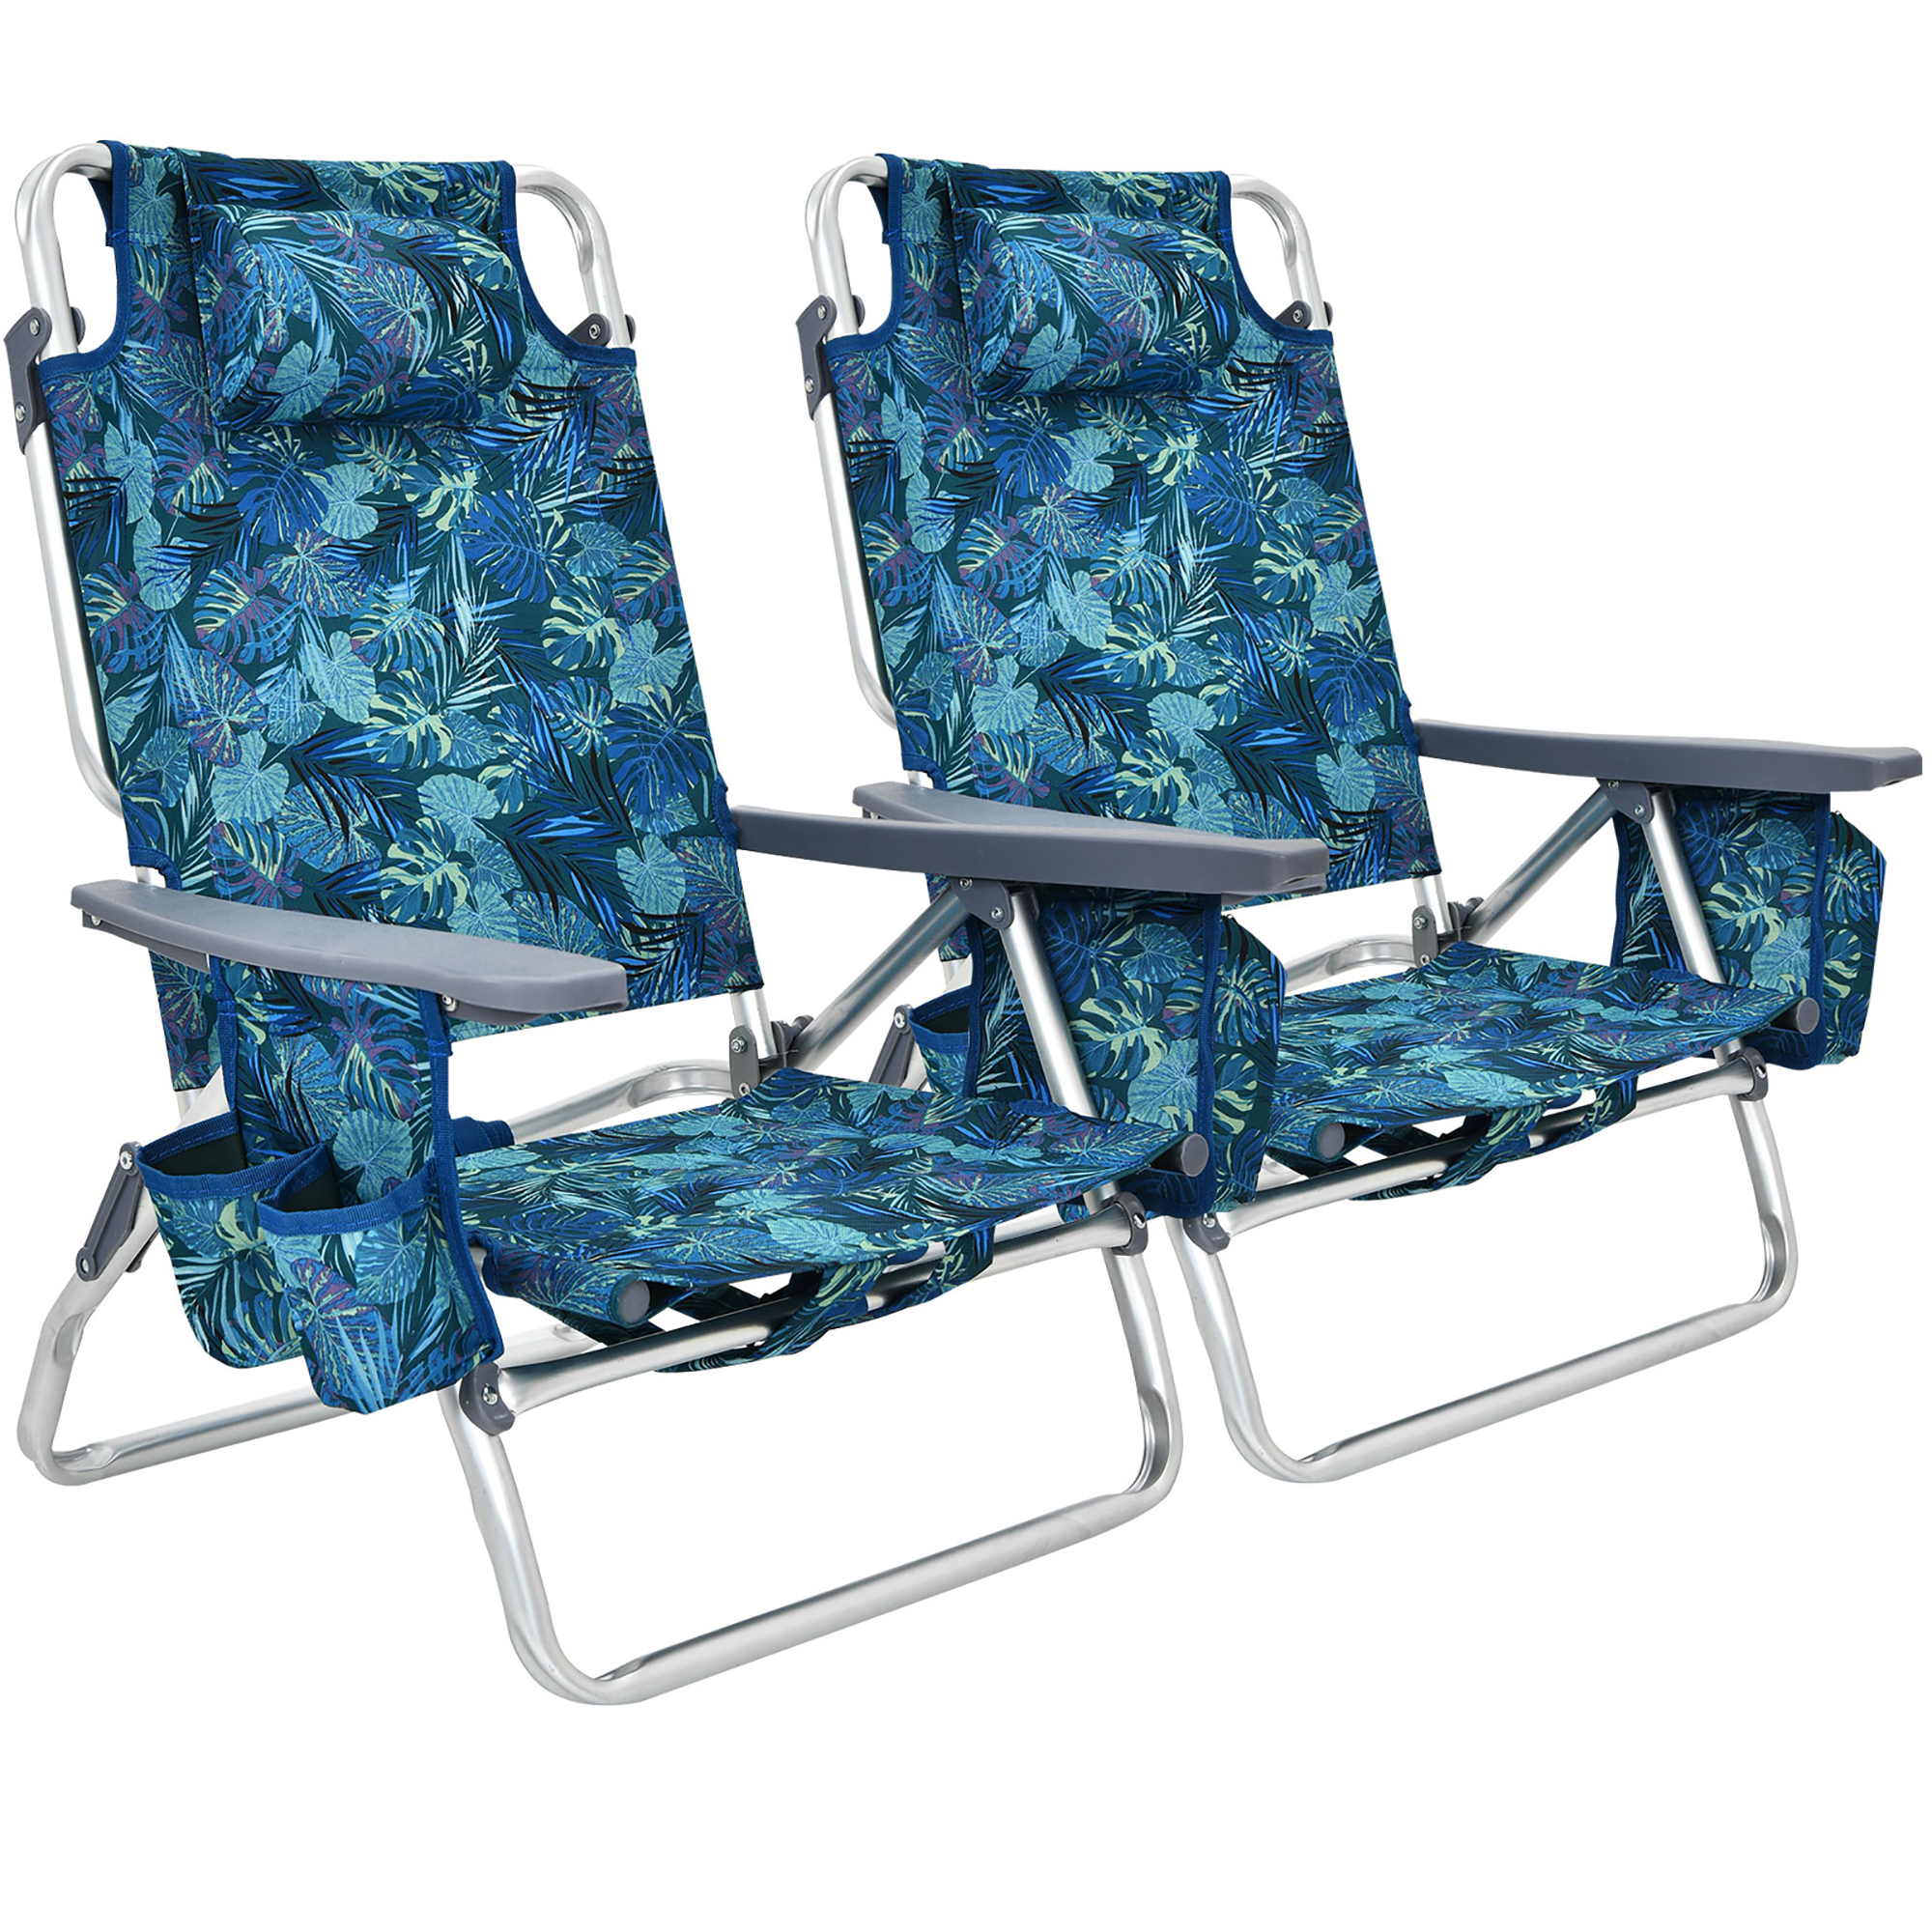 Costway 2-Pack Folding Backpack Beach Chair 5-Position Outdoor Reclining Chairs with Pillow Pattern - image 5 of 10